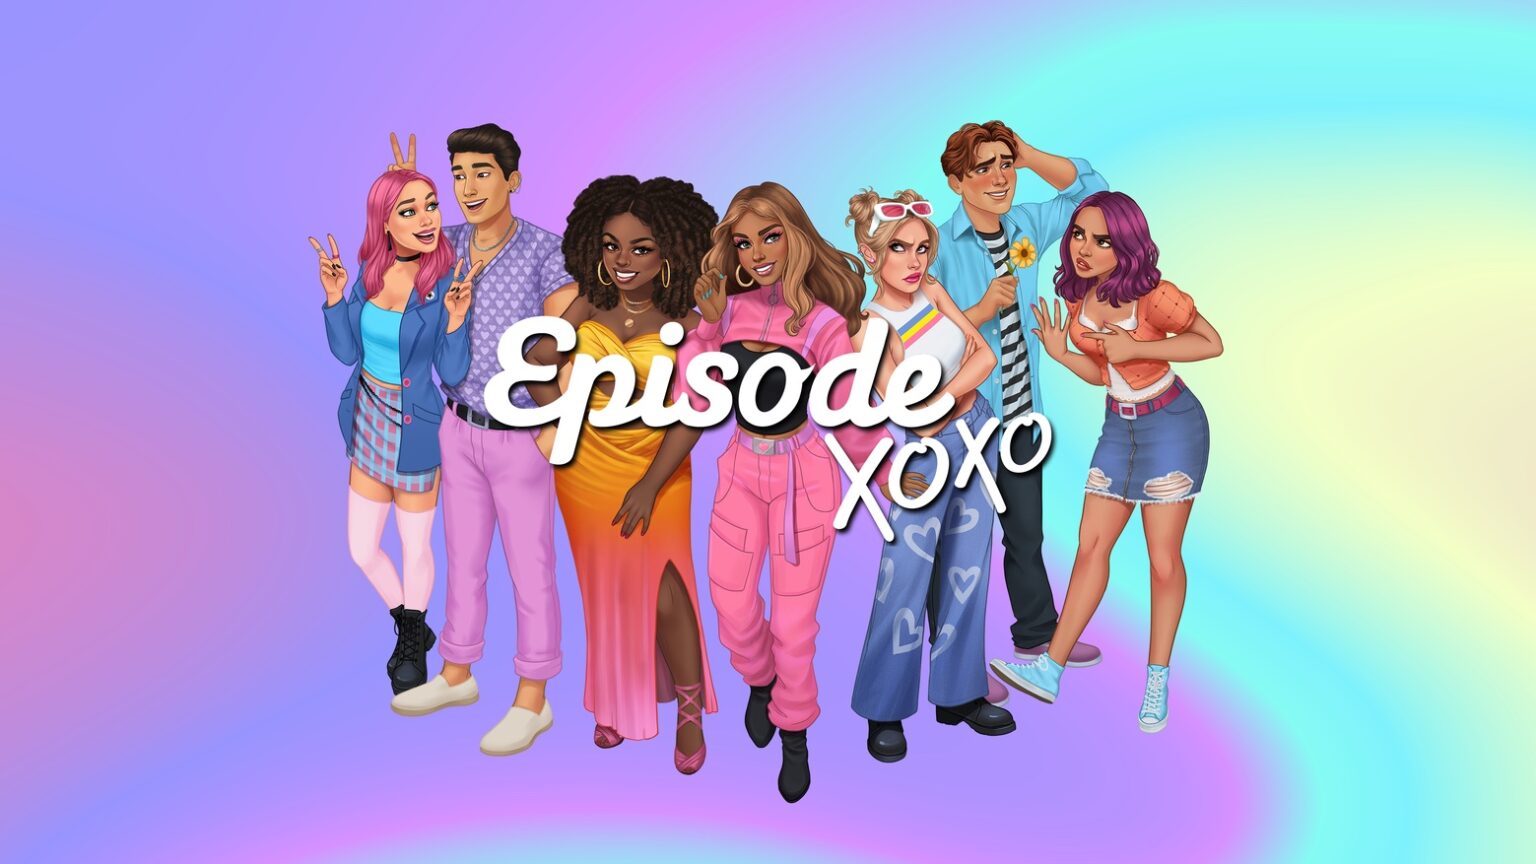 Become a character in a love story in 'Episode XOXO'